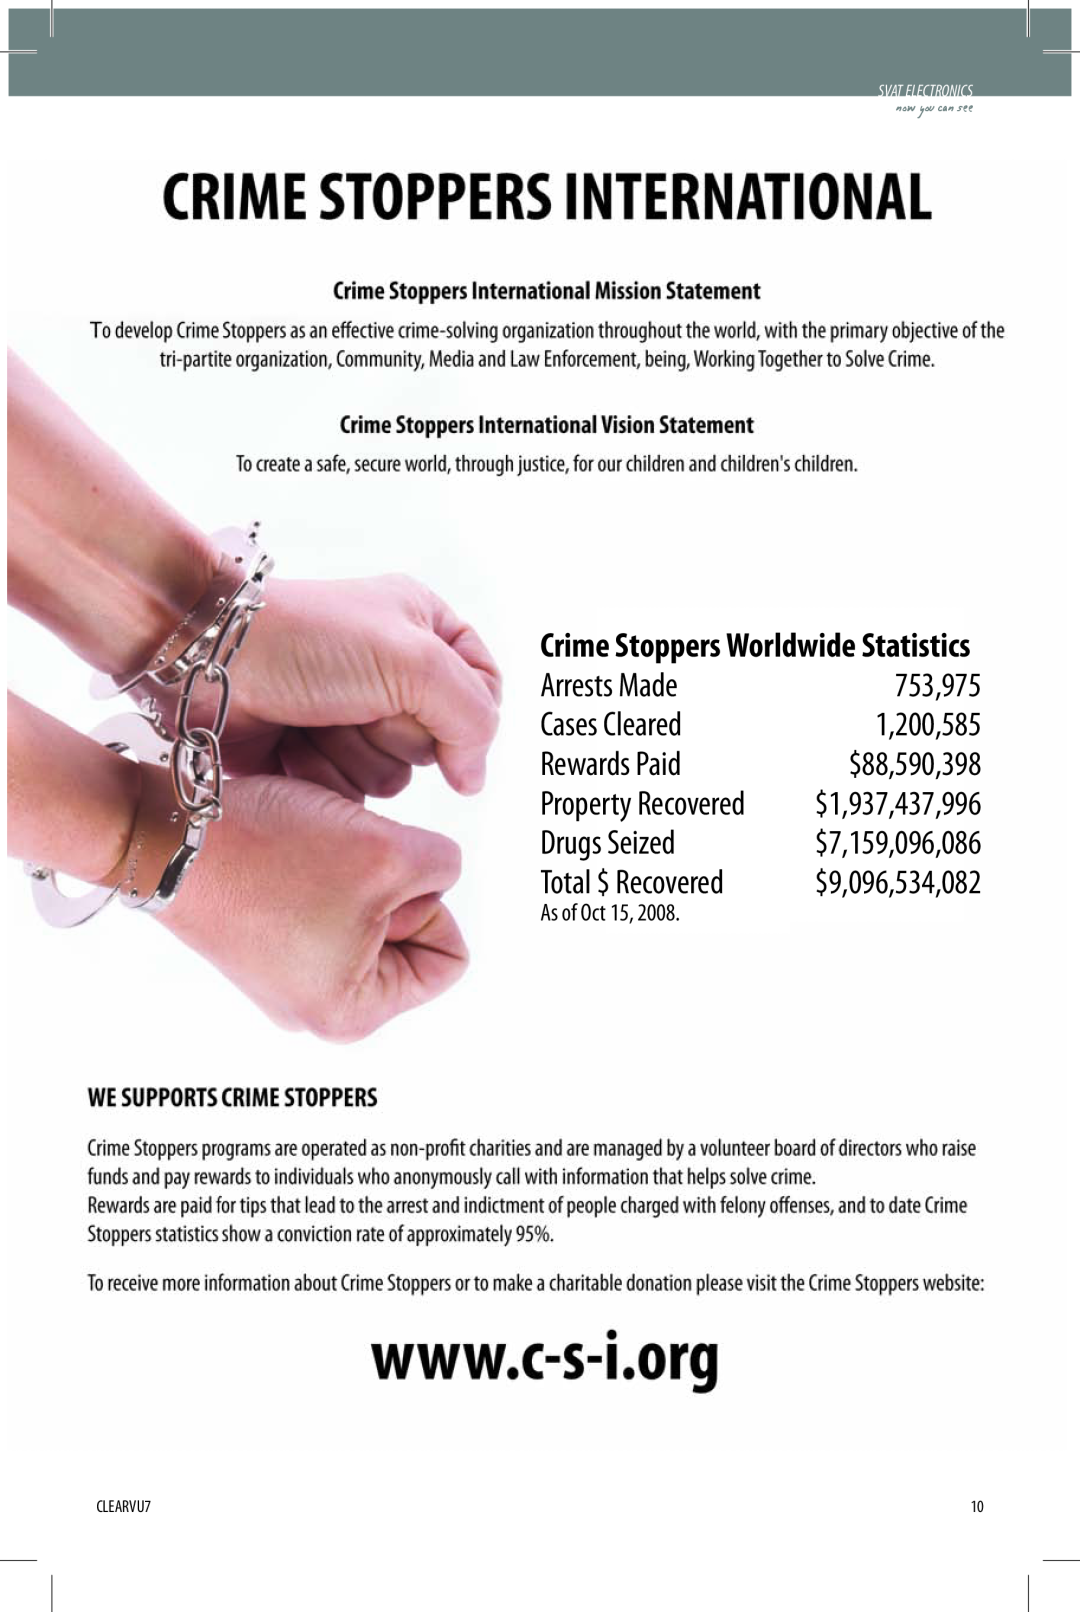 SVAT Electronics CLEARVU7 Arrests Made, 753,975, Cases Cleared, 1,200,585, Rewards Paid, Drugs Seized, $88,590,398 